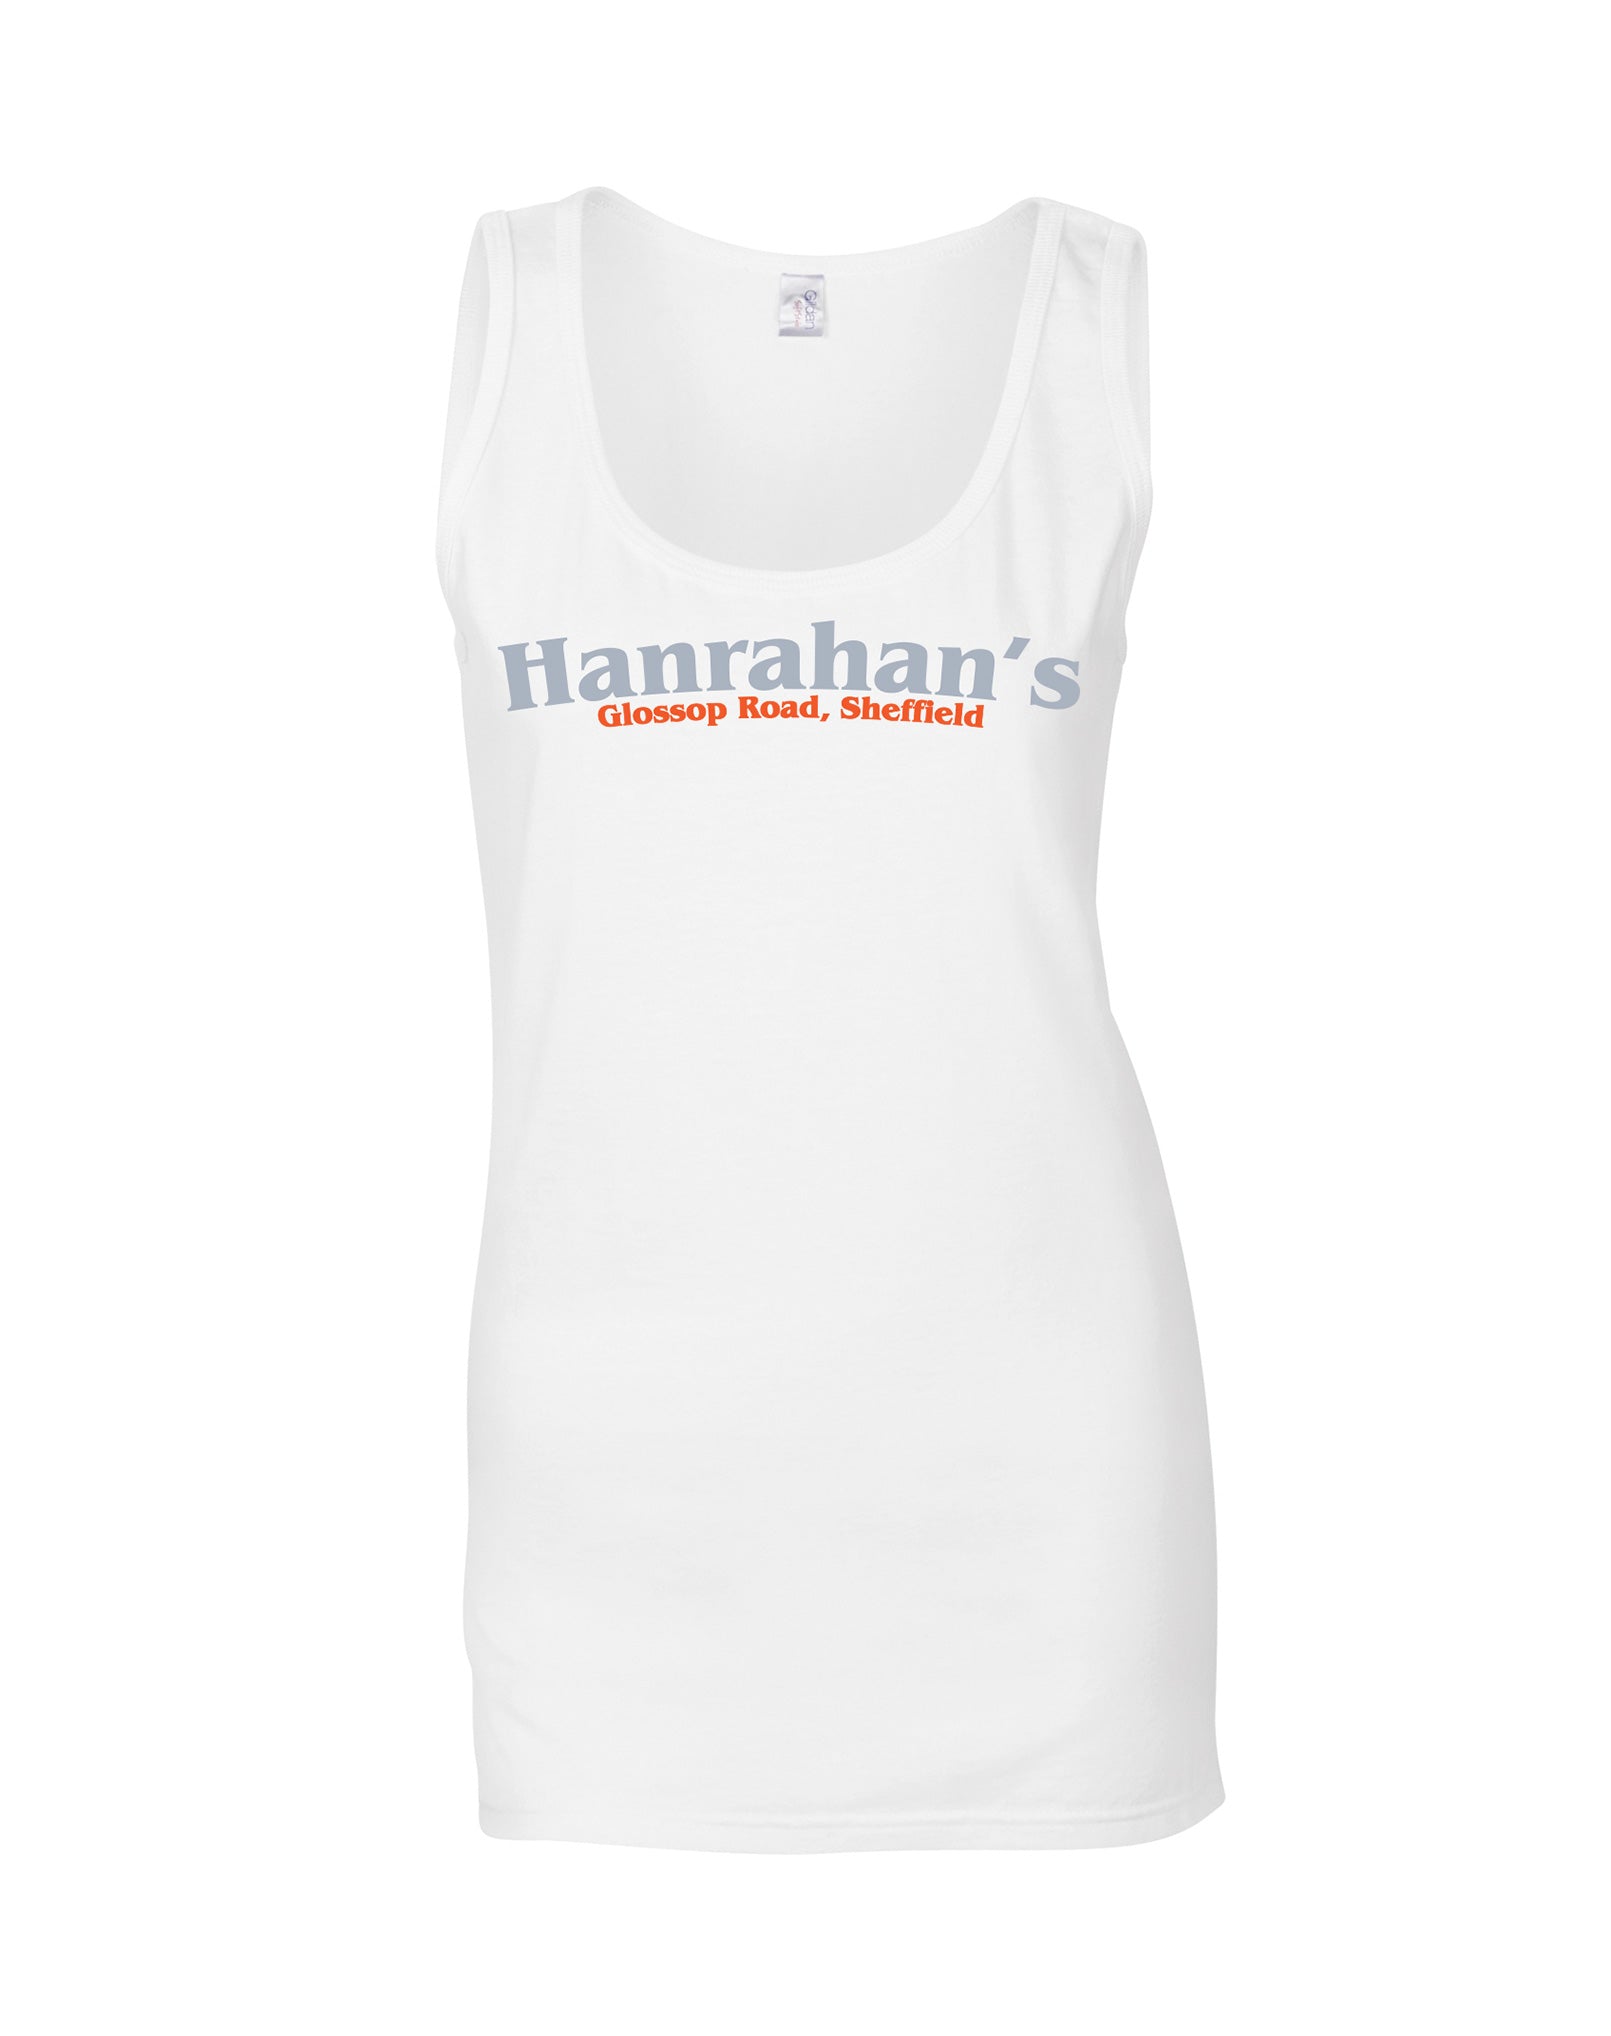 Hanrahan's ladies fit vest - various colours - Dirty Stop Outs